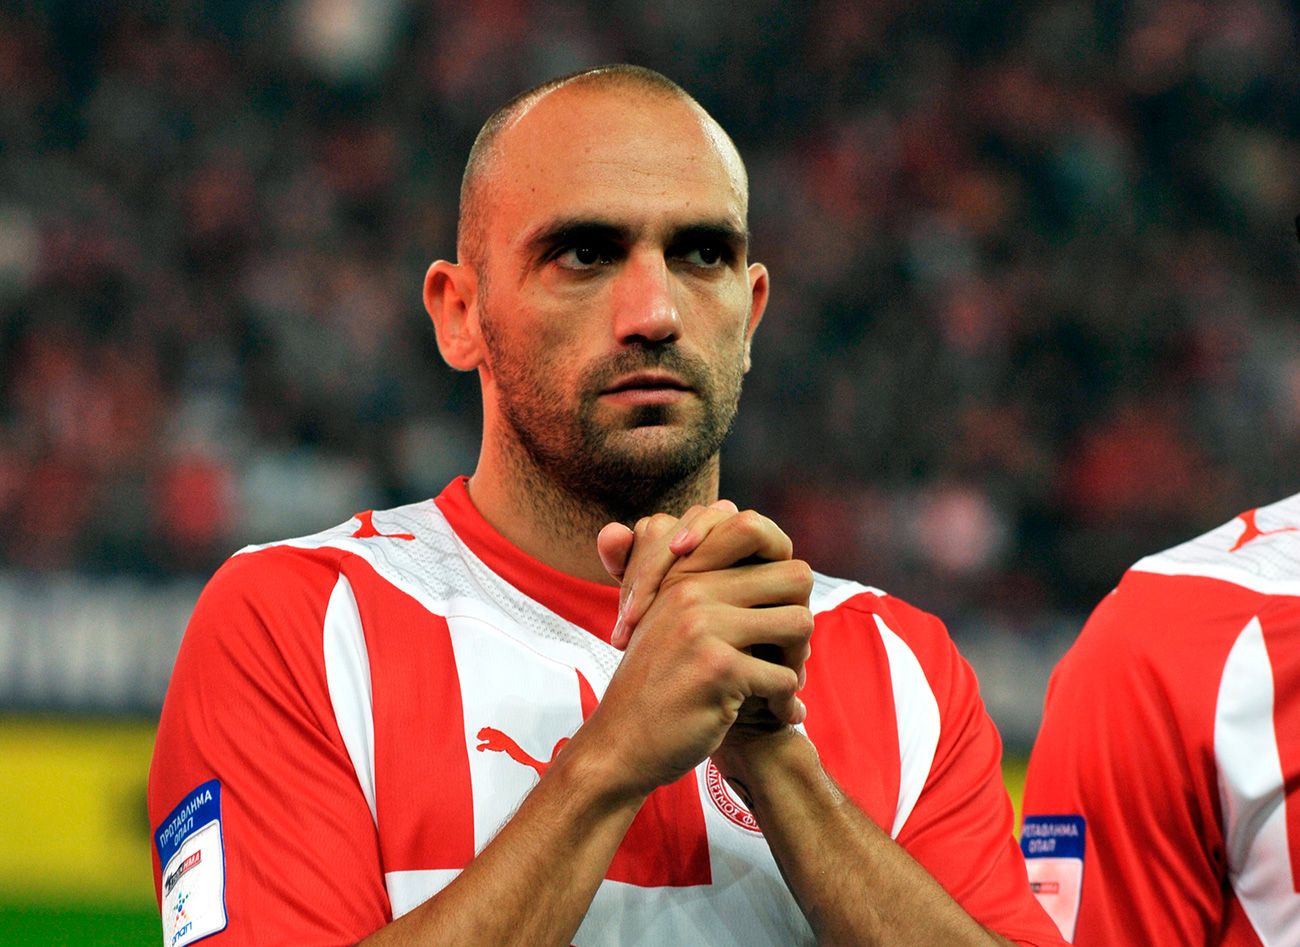 Raúl Bravo in his stage in the Olympiacos